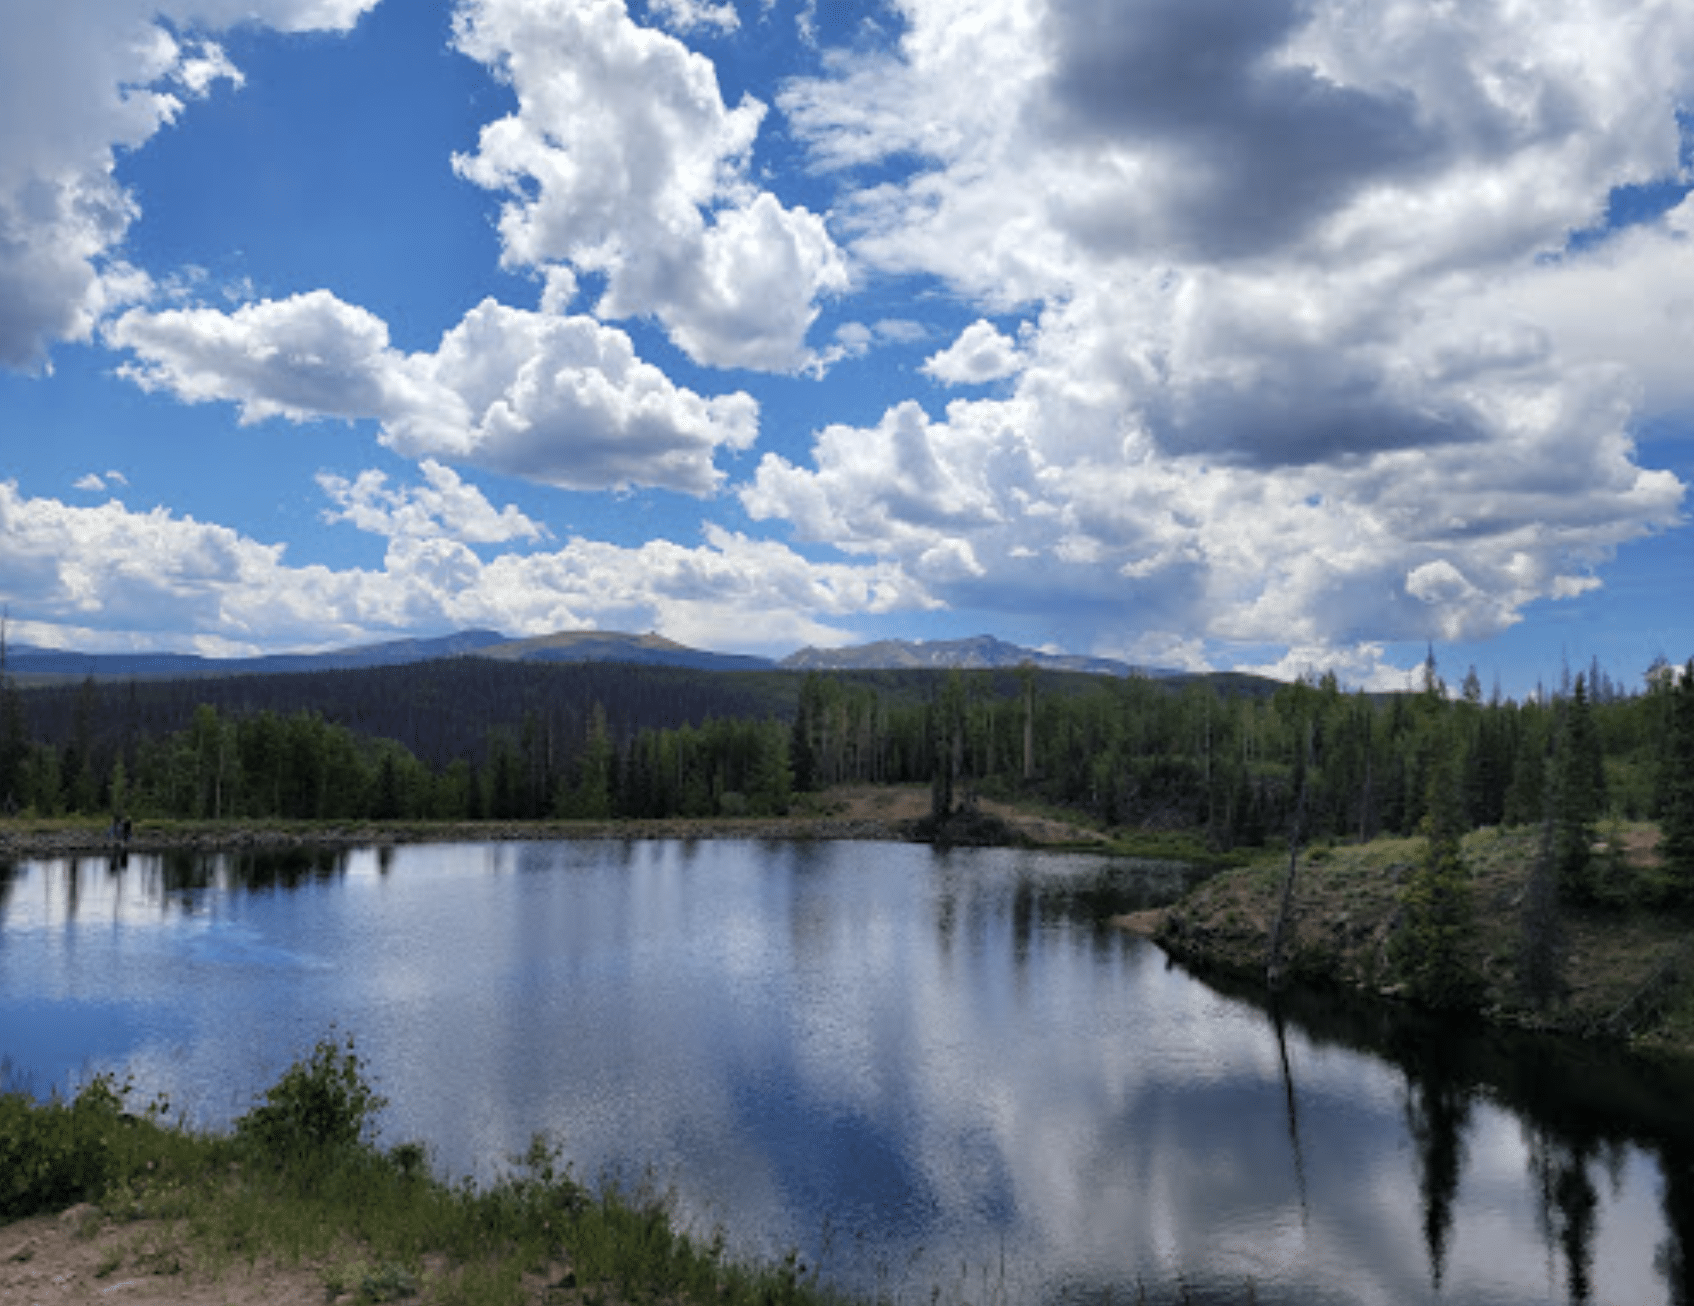 Deer Lakes is remote and beautiful. Just a short drive from Lake City, Co.